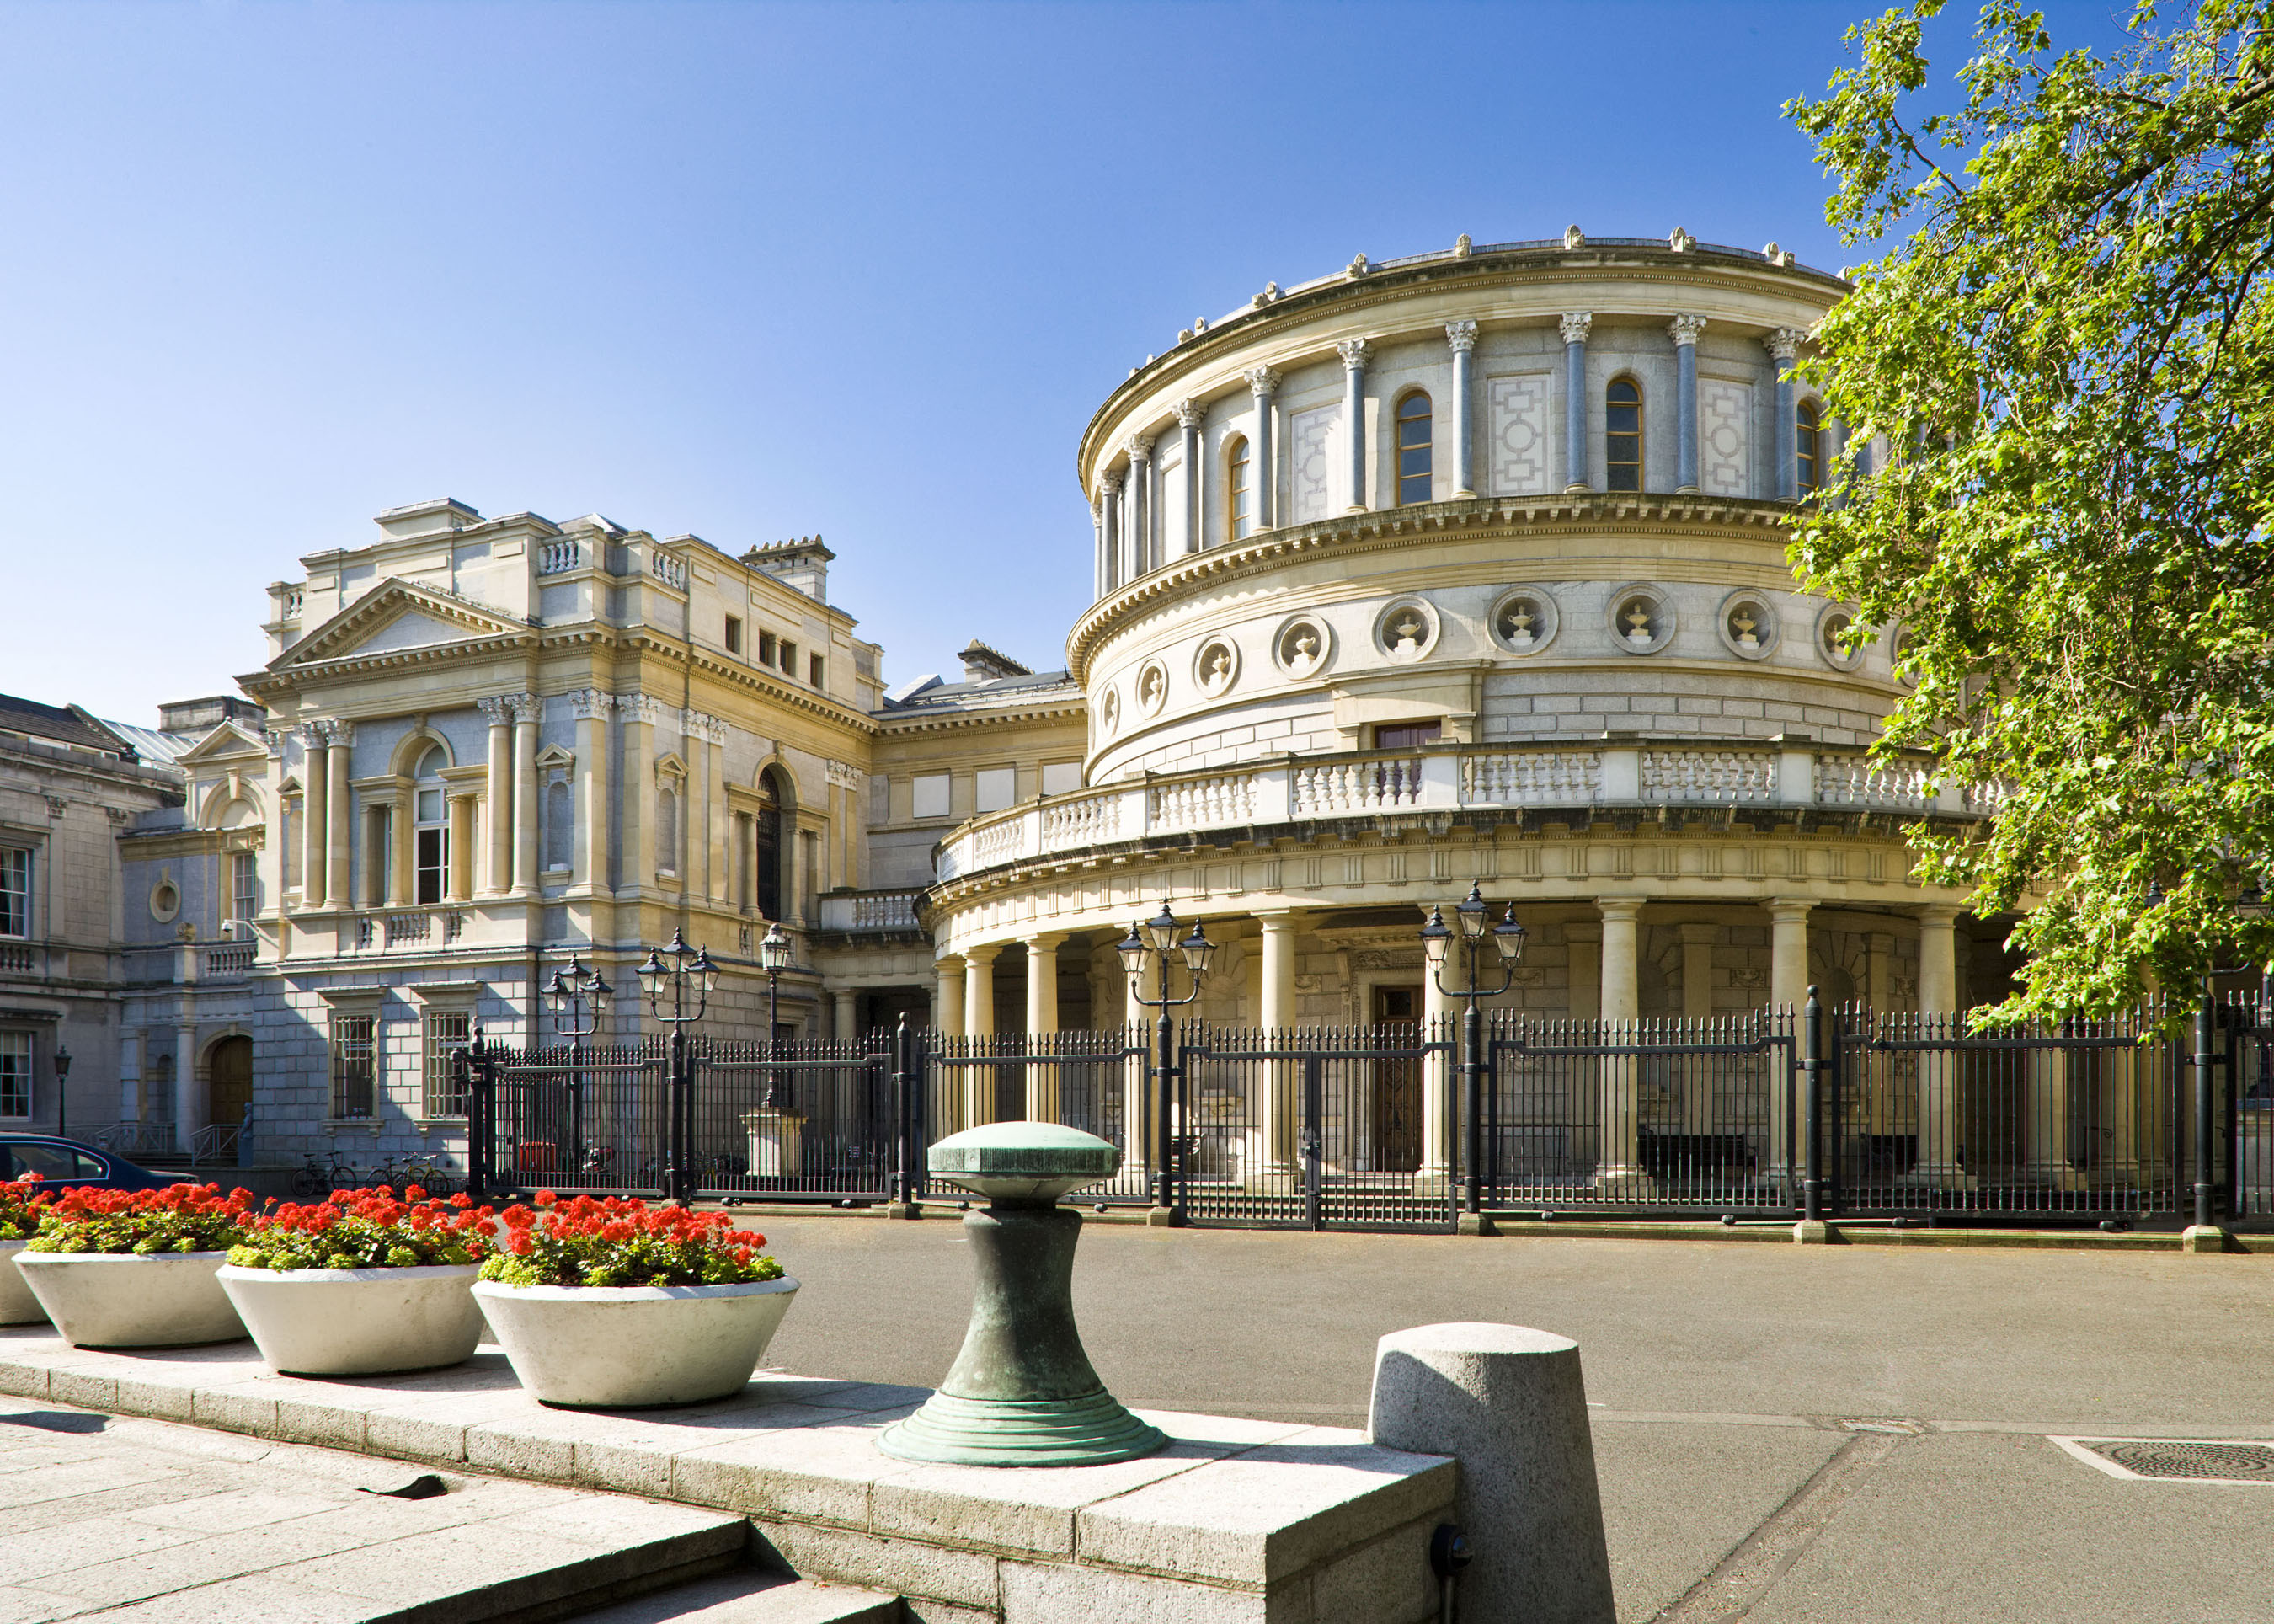 The National Museum of Ireland is among the best galleries and museums in Dublin 